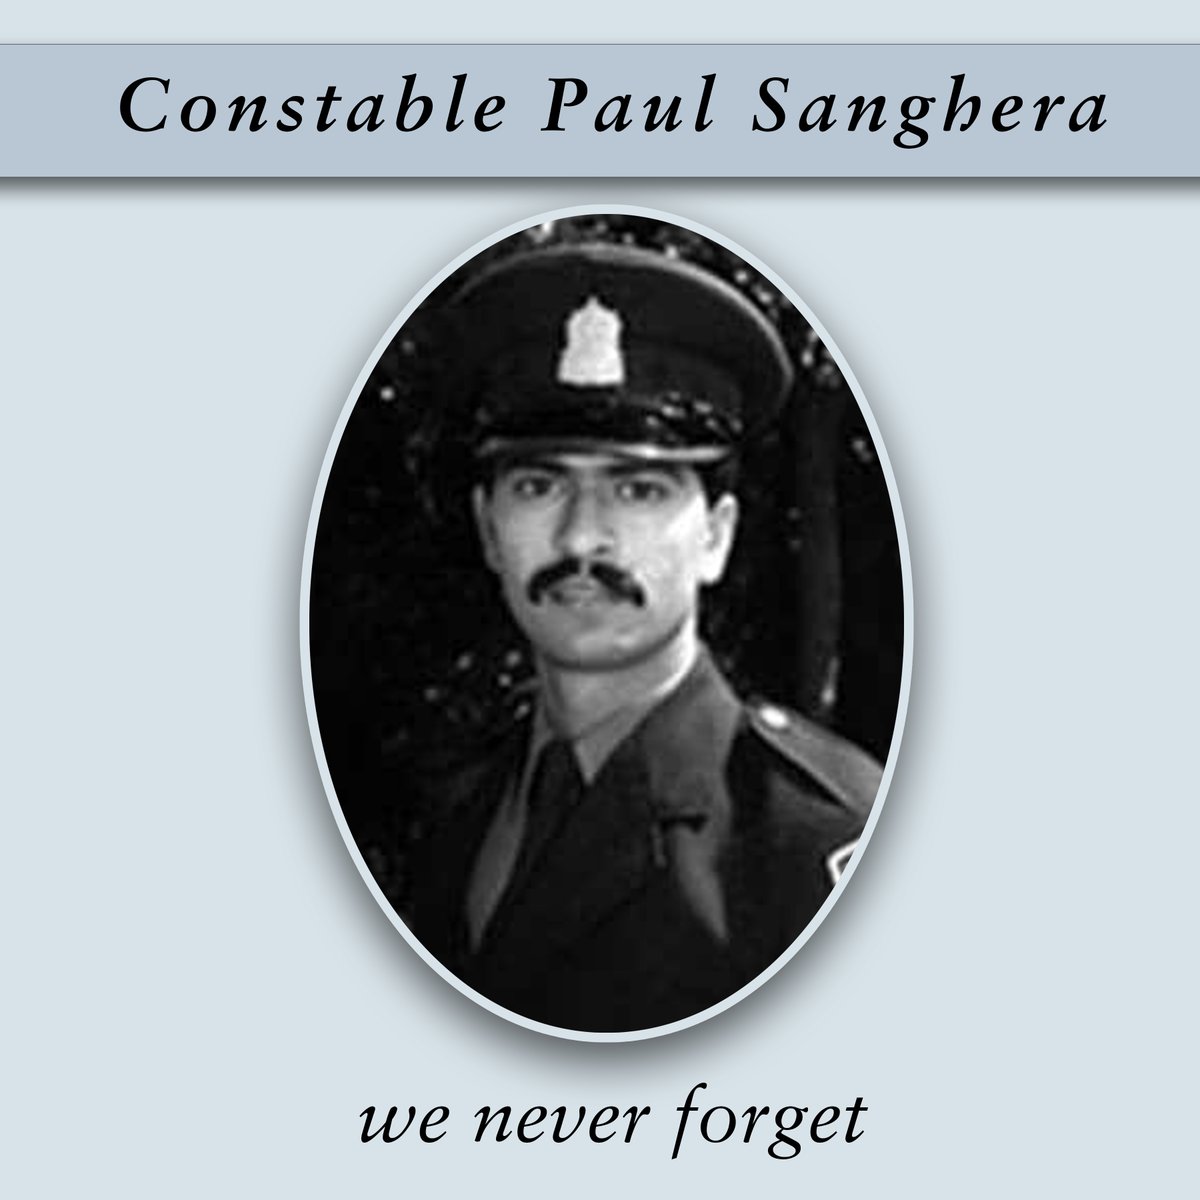 We #NeverForget #VPD Cst. Paul Sanghera (22 yrs old) who was killed in the #LineOfDuty 42 yrs ago today while proudly serving the people of #Vancouver. He was struck by a car at E 57th & Argyle St #LODD #EOW @VancouverPD @VPDSoccer @BCSAPOA @BCLEMemorial @CPPOM #VancouversFinest